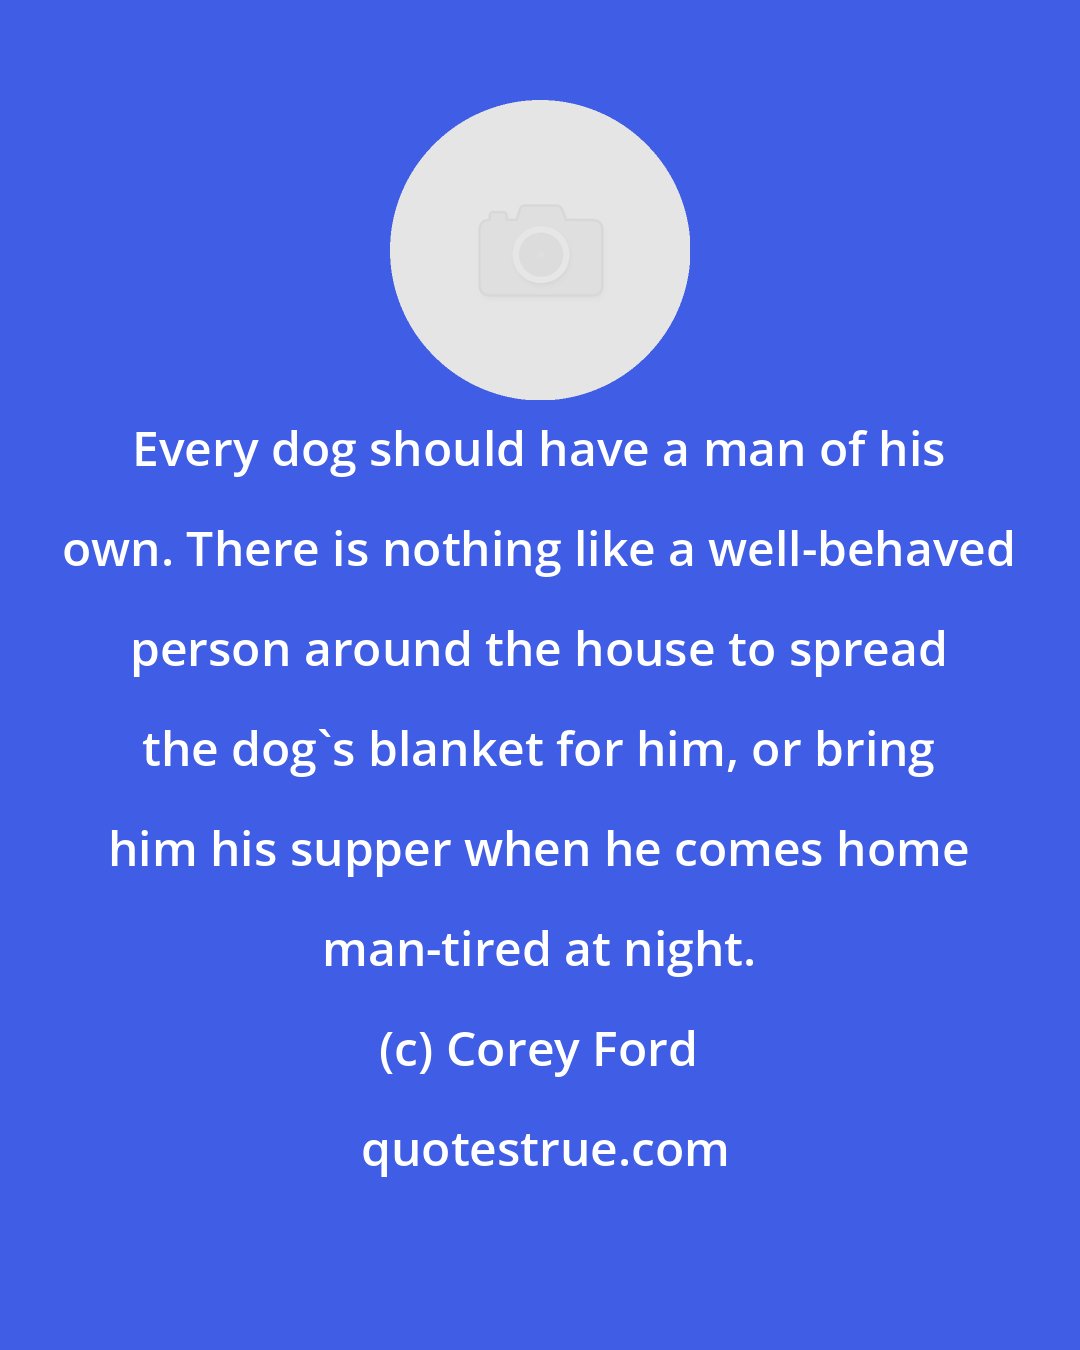 Corey Ford: Every dog should have a man of his own. There is nothing like a well-behaved person around the house to spread the dog's blanket for him, or bring him his supper when he comes home man-tired at night.